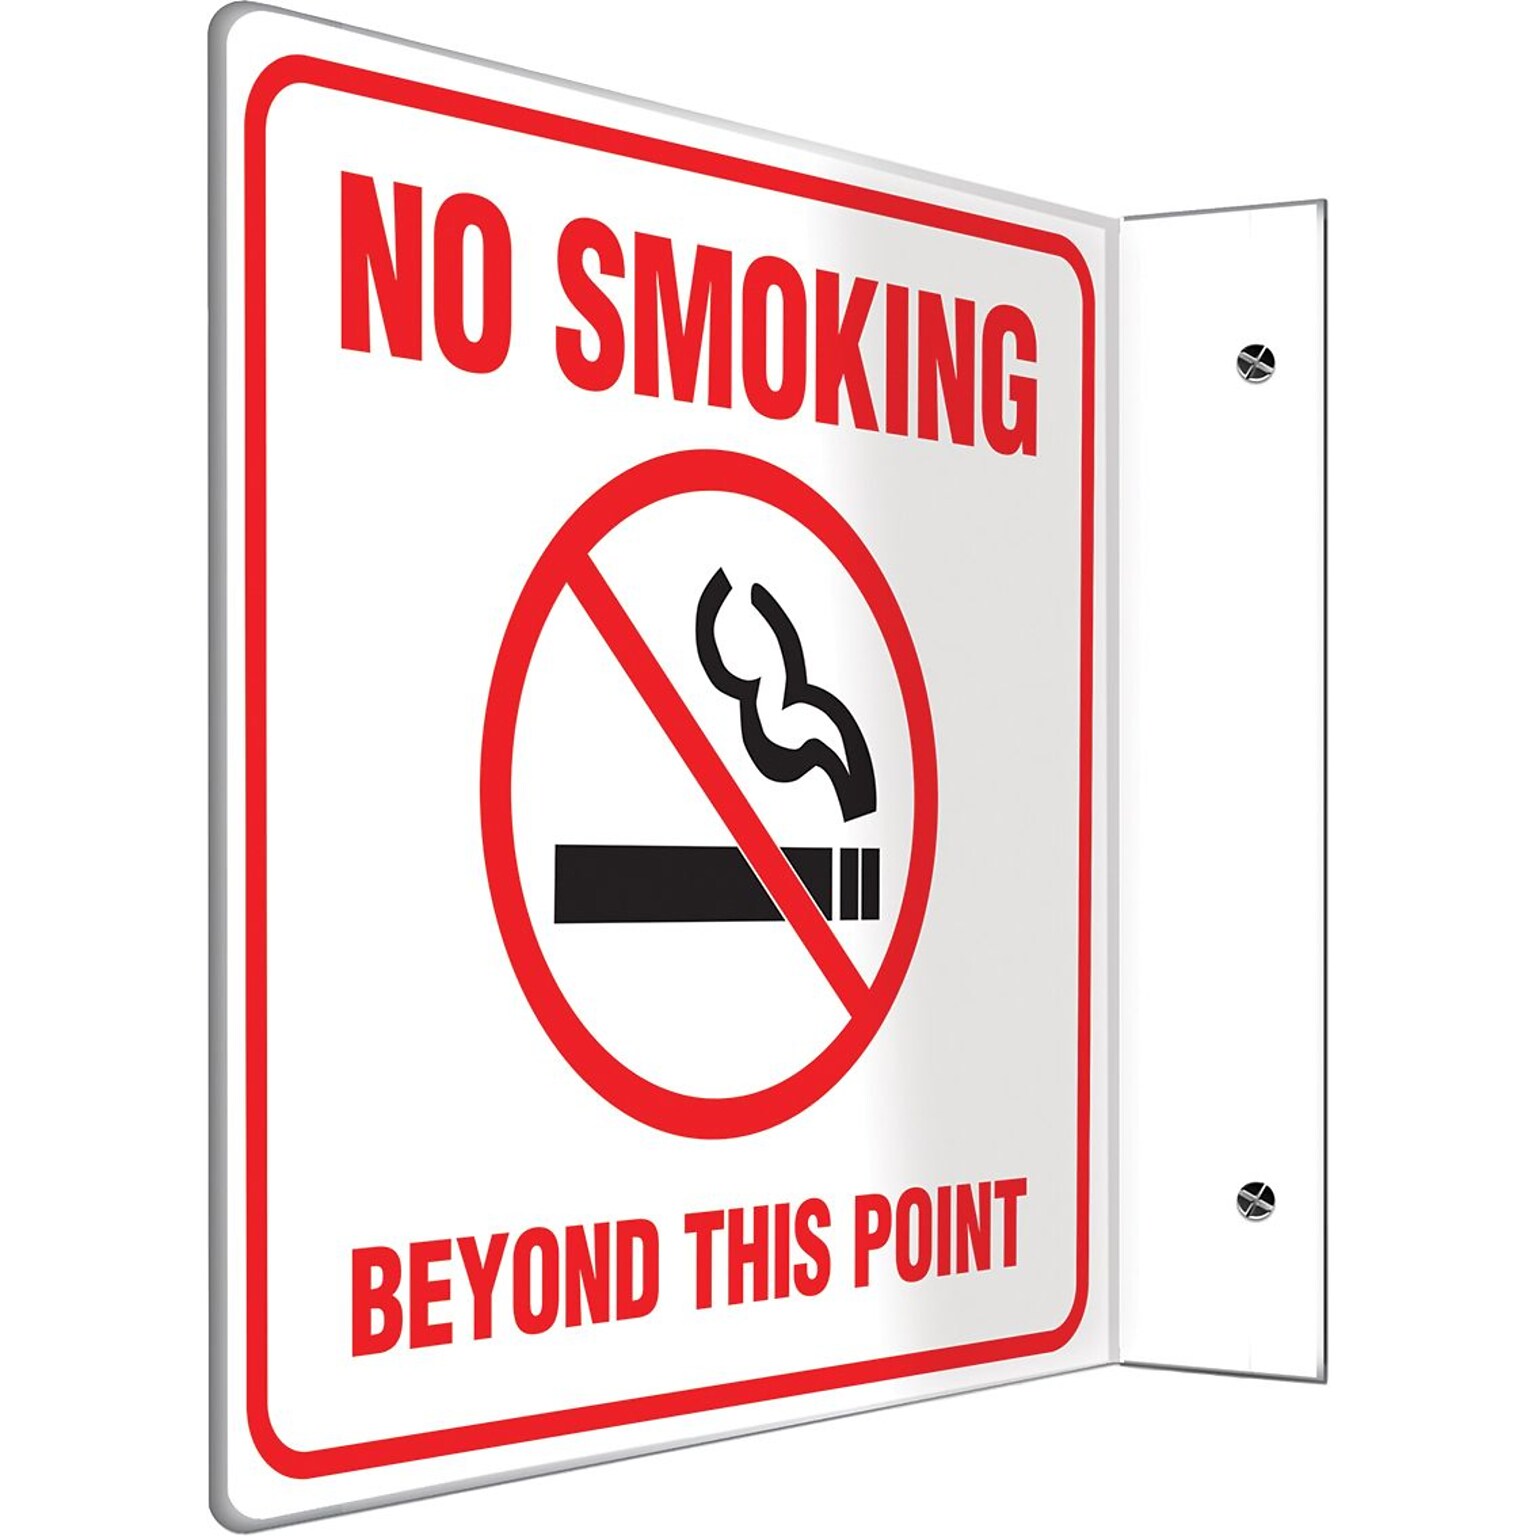 Accuform No Smoking Beyond This Point Projection Sign, Red/Black/White, 8H x 8W (PSP493)